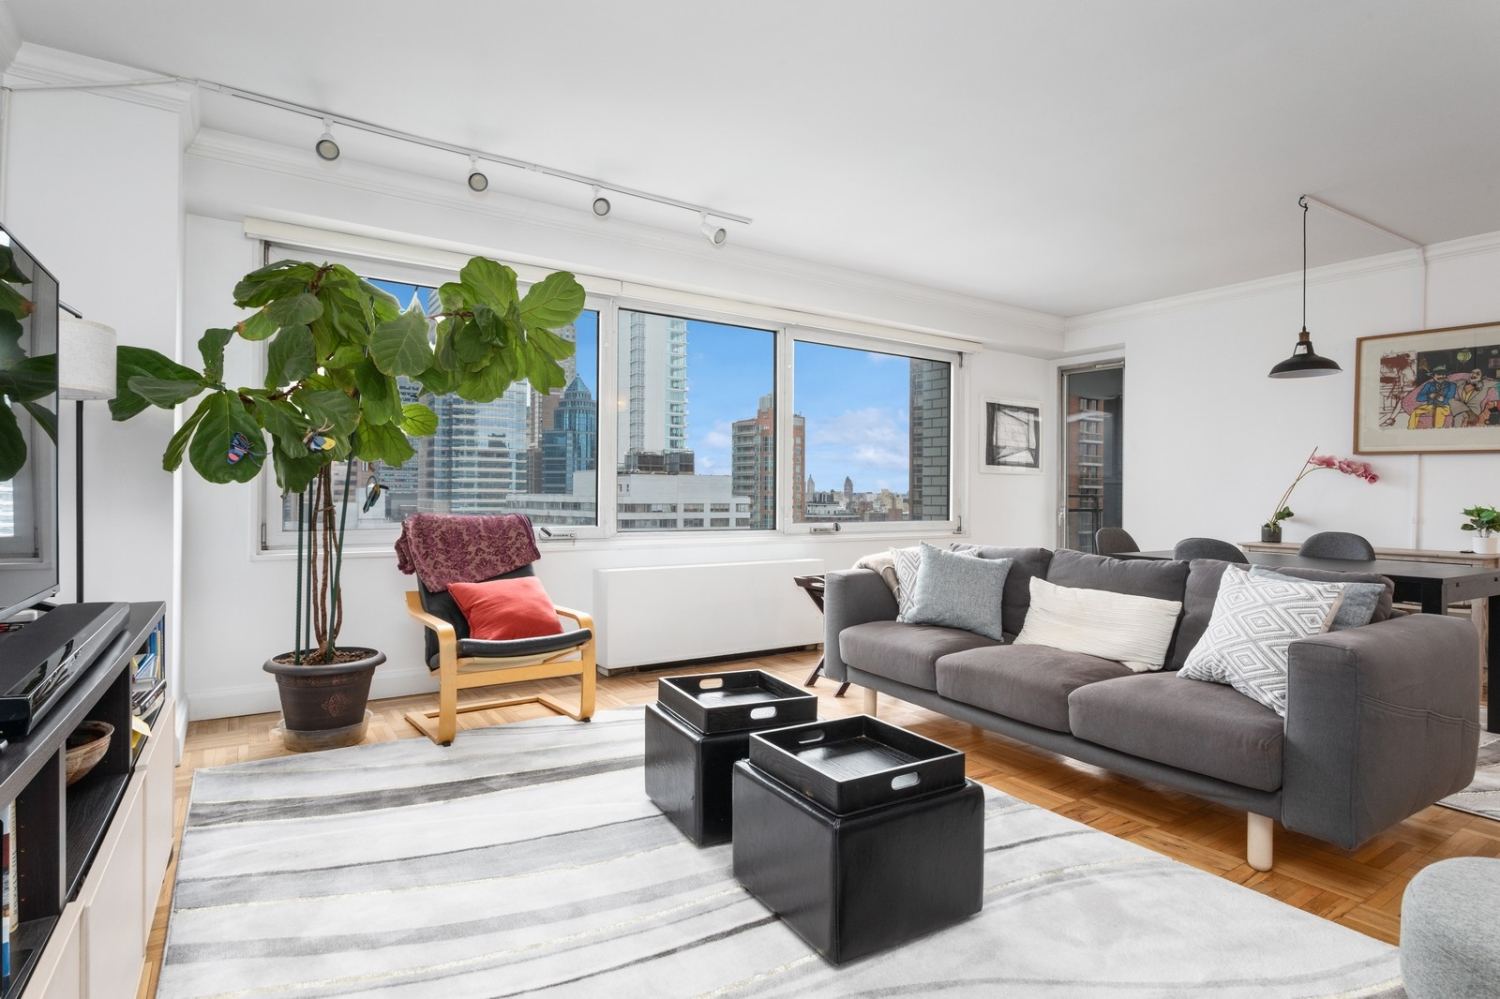 303 East 57th Street 22E, Sutton, Midtown East, NYC - 2 Bedrooms  
1.5 Bathrooms  
4 Rooms - 